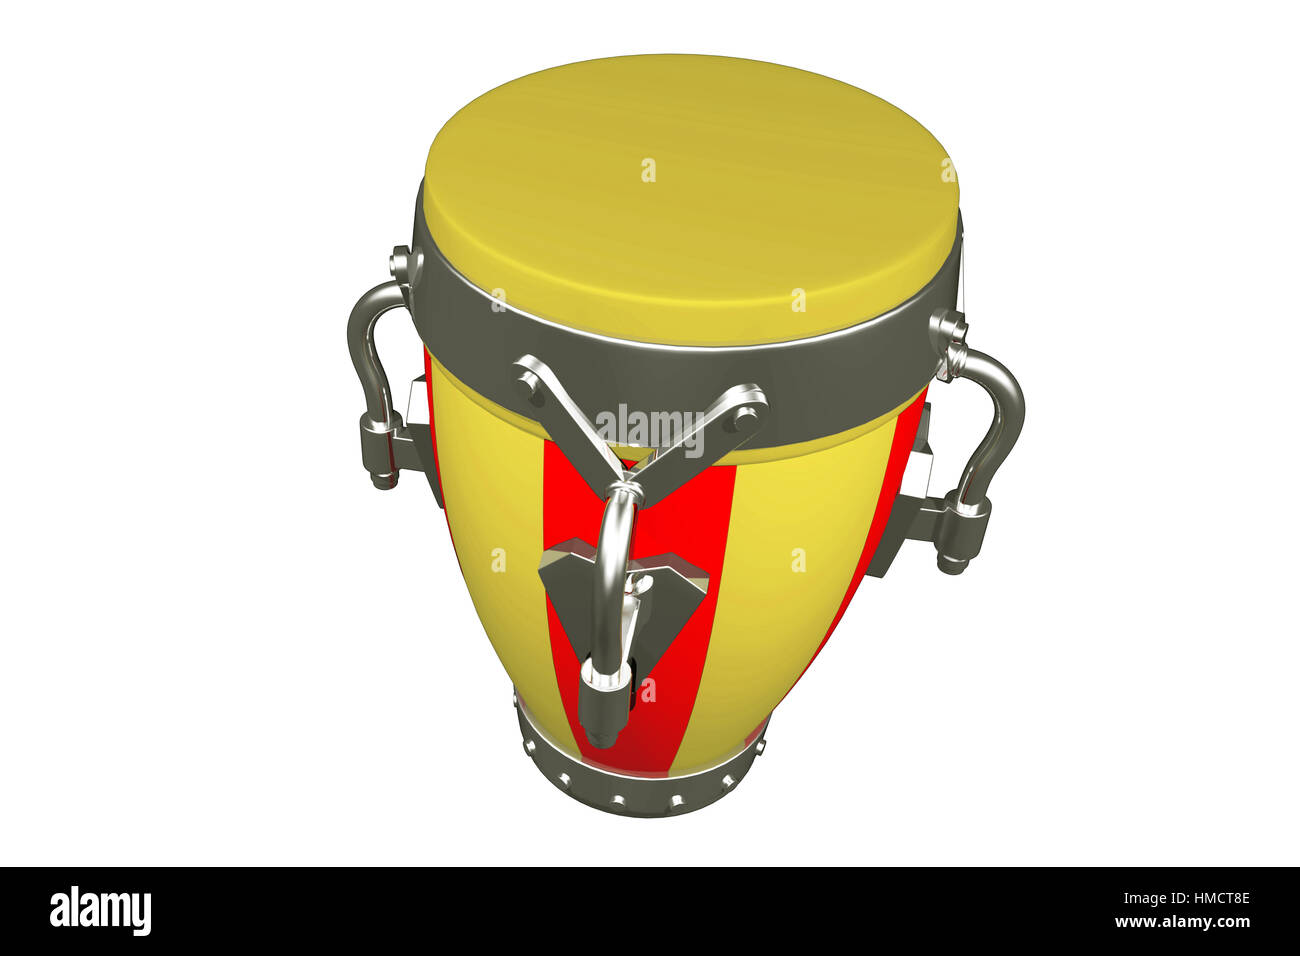 red and yellow stripes carnival musical instrument drum illustration with isolated white background Stock Photo